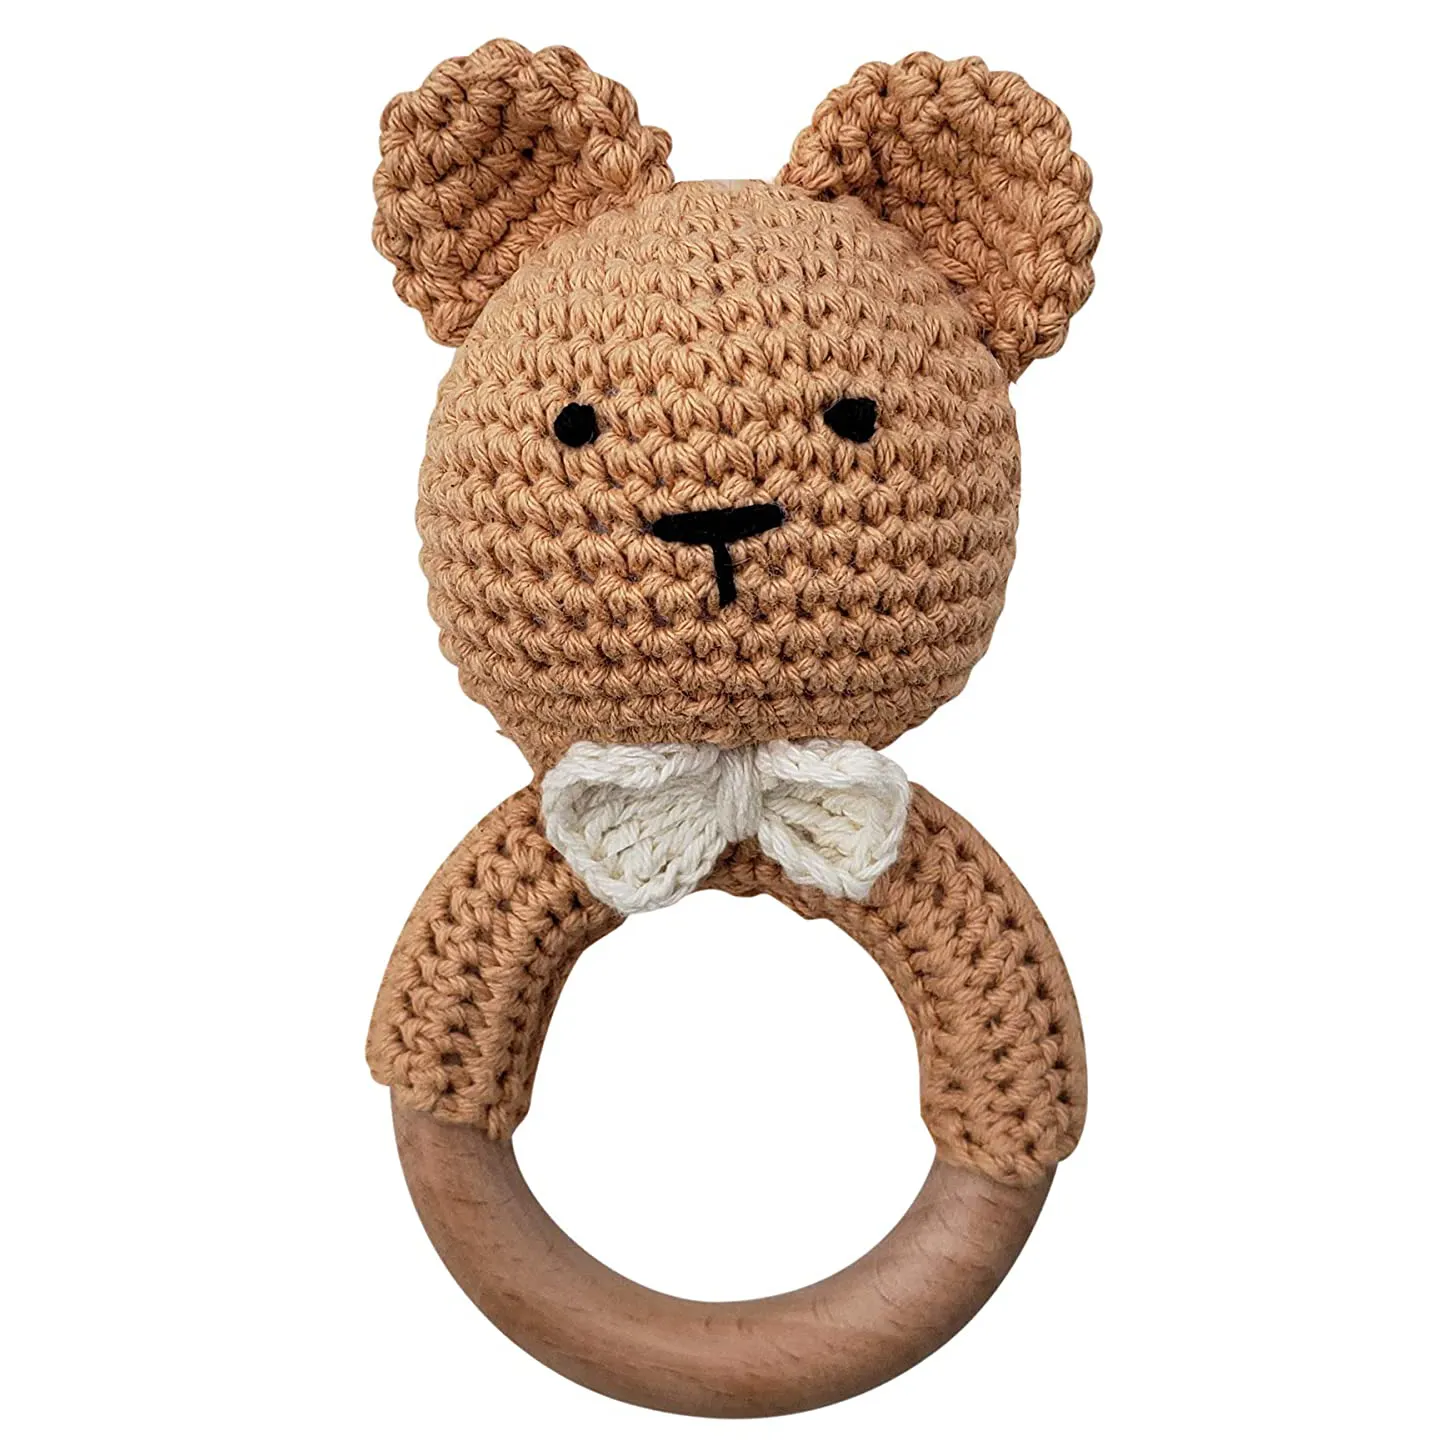 Natural Crochet Teddy Bear Teether Baby Toy Rattle Forest Friends Amigurumi On Natural Wooden Teething Ring Rattle New Born Baby